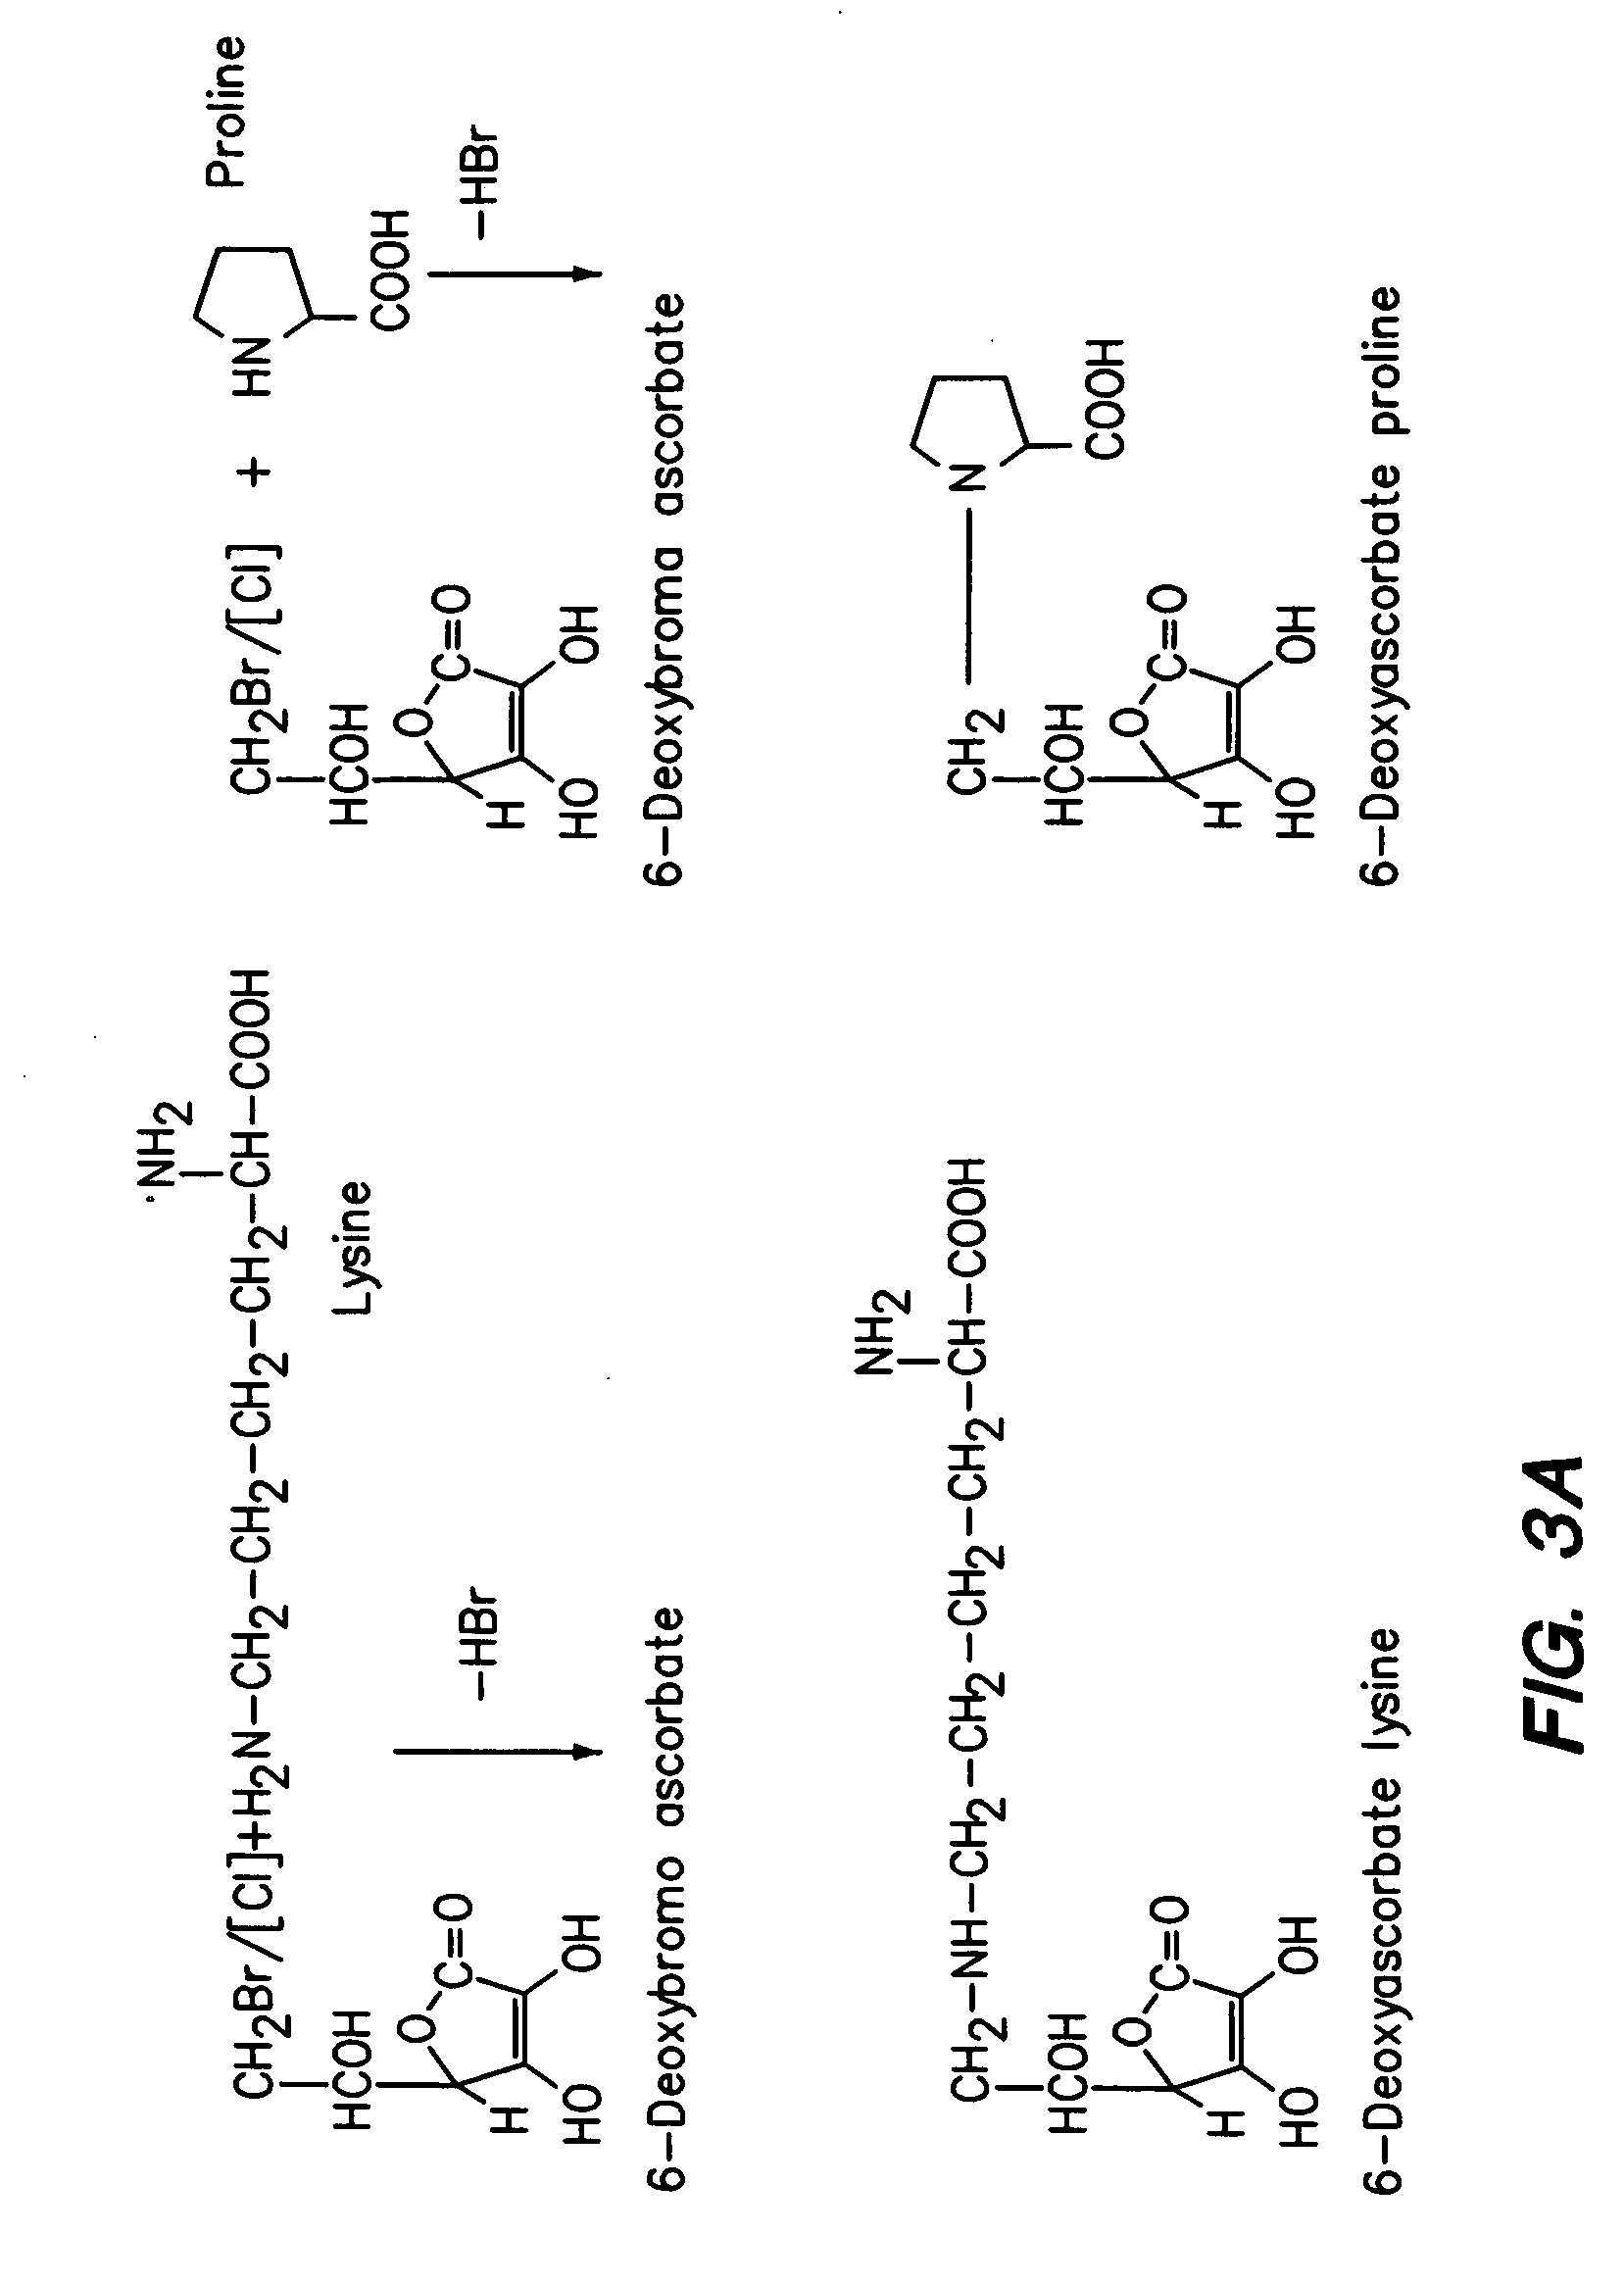 Novel ascorbic acid compounds, methods of synthesis and application use thereof